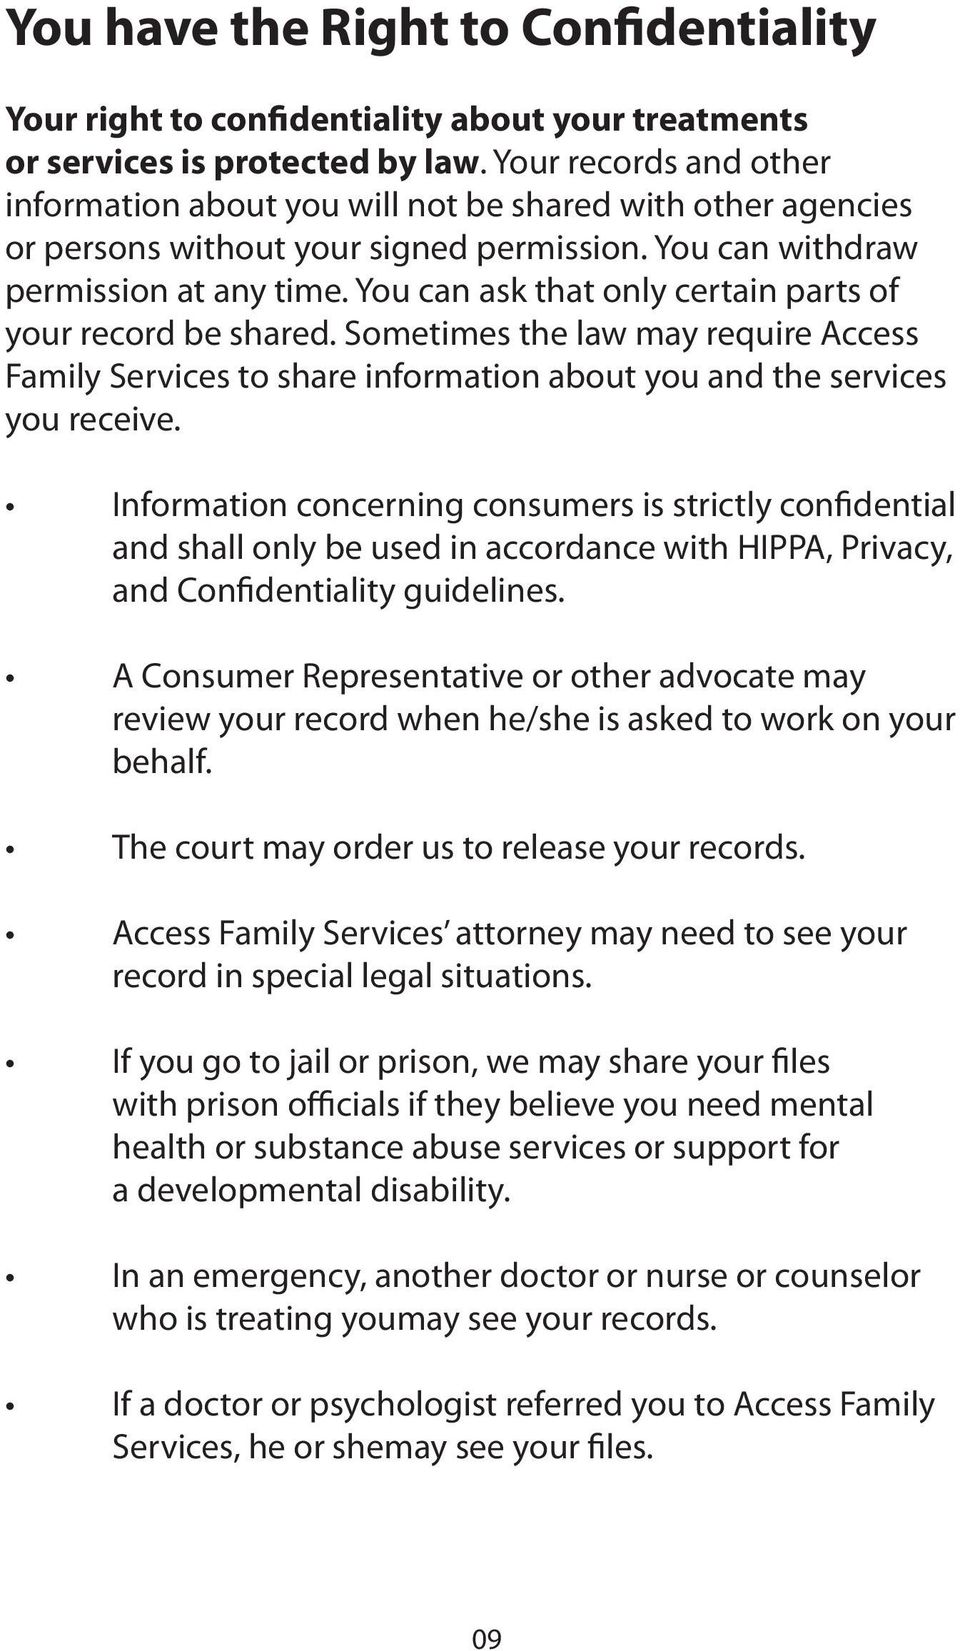 You can ask that only certain parts of your record be shared. Sometimes the law may require Access Family Services to share information about you and the services you receive.